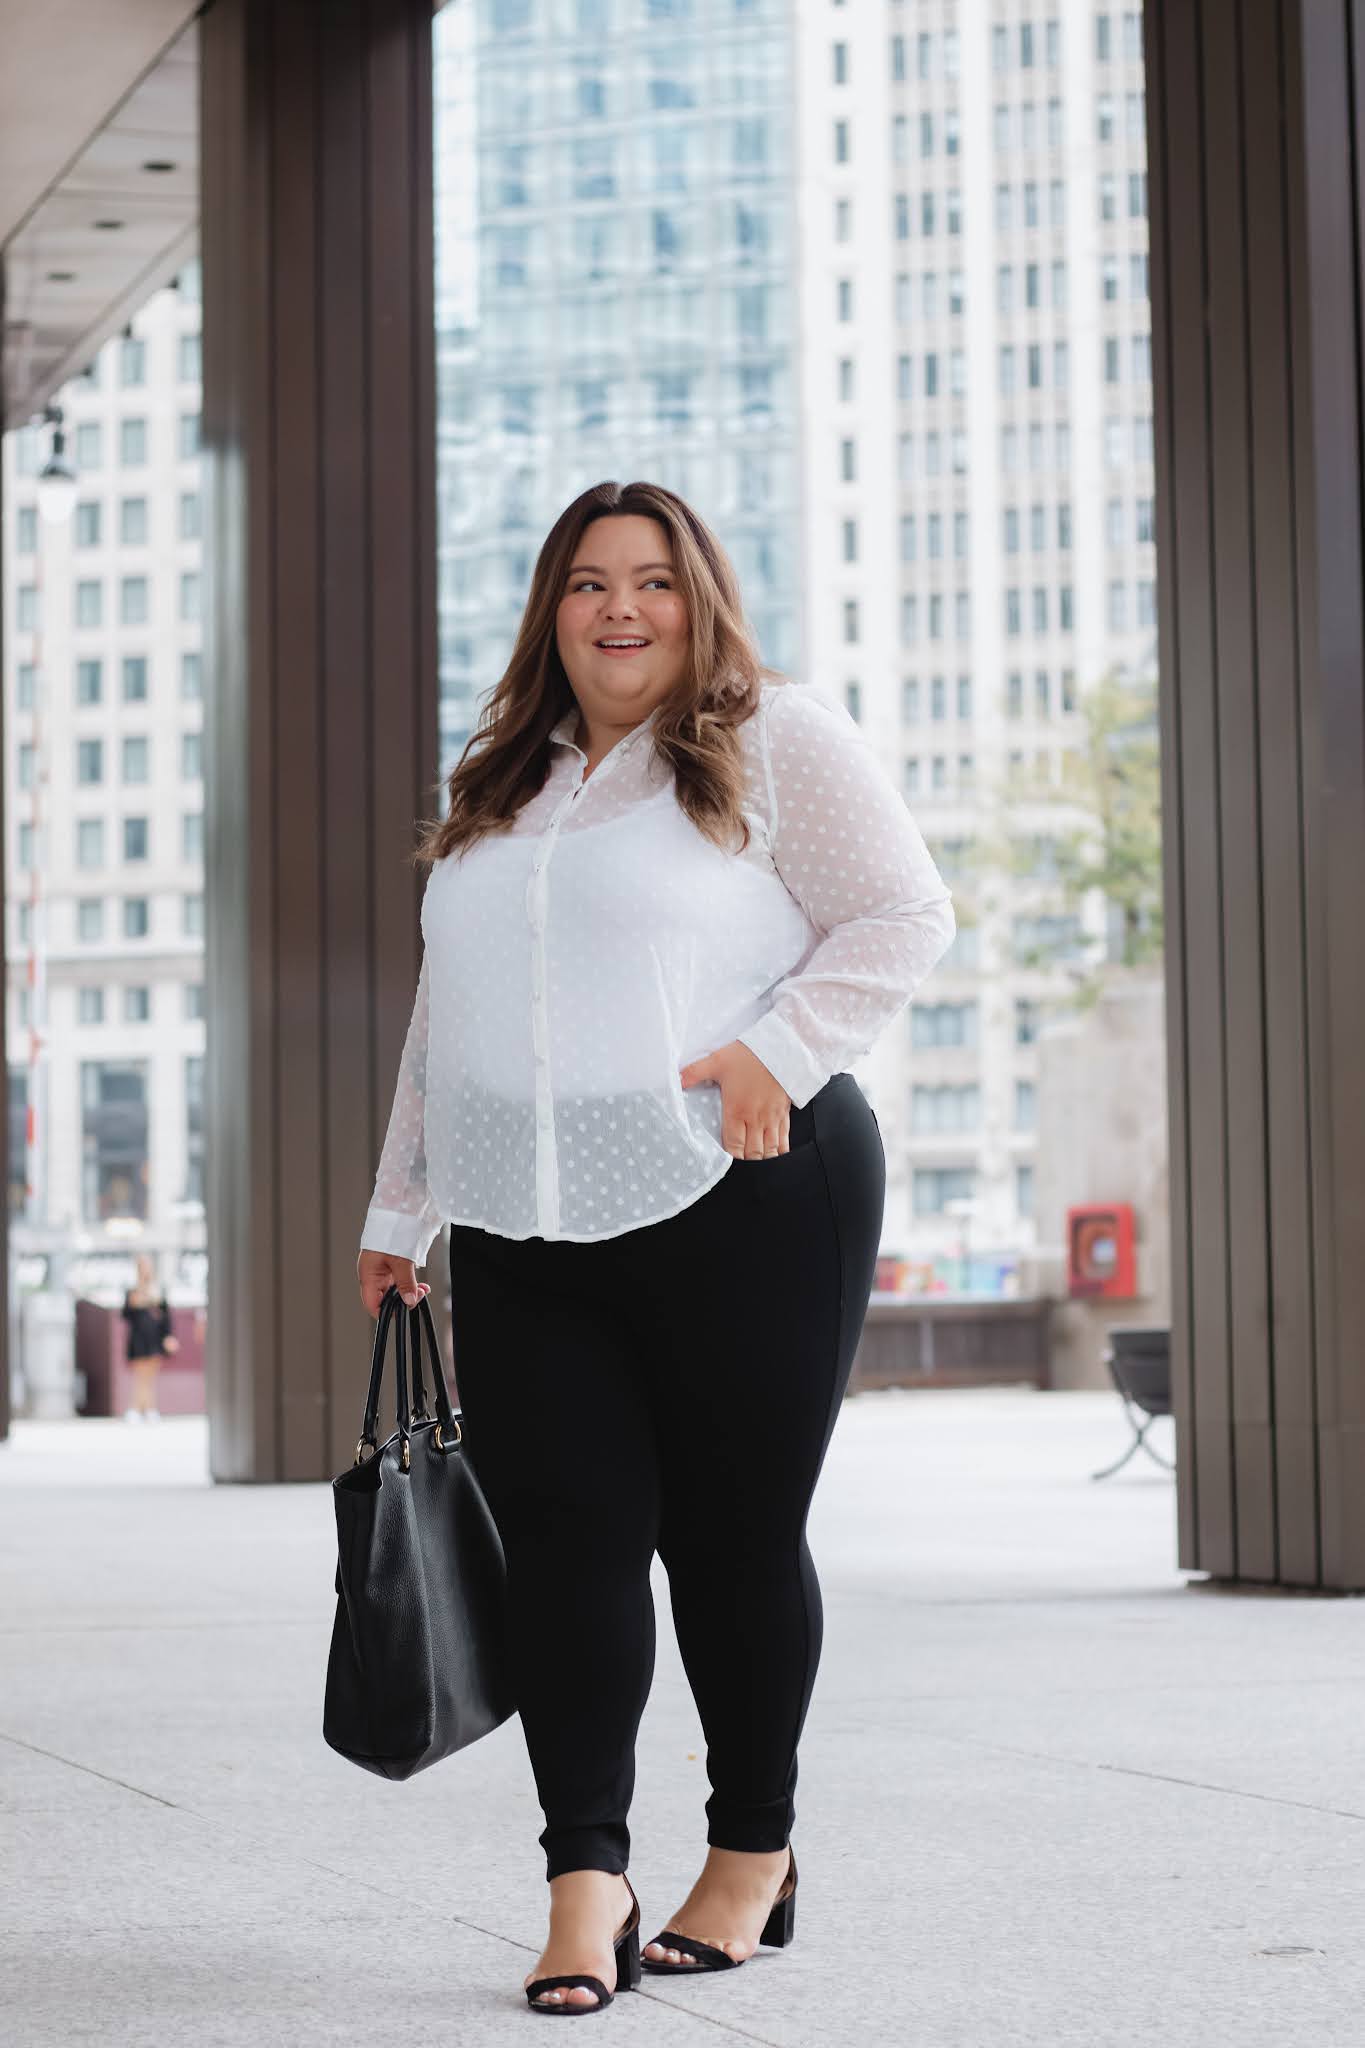 12 petite plus size clothing brands to shop-from petite plus size jeans to petite plus size dresses